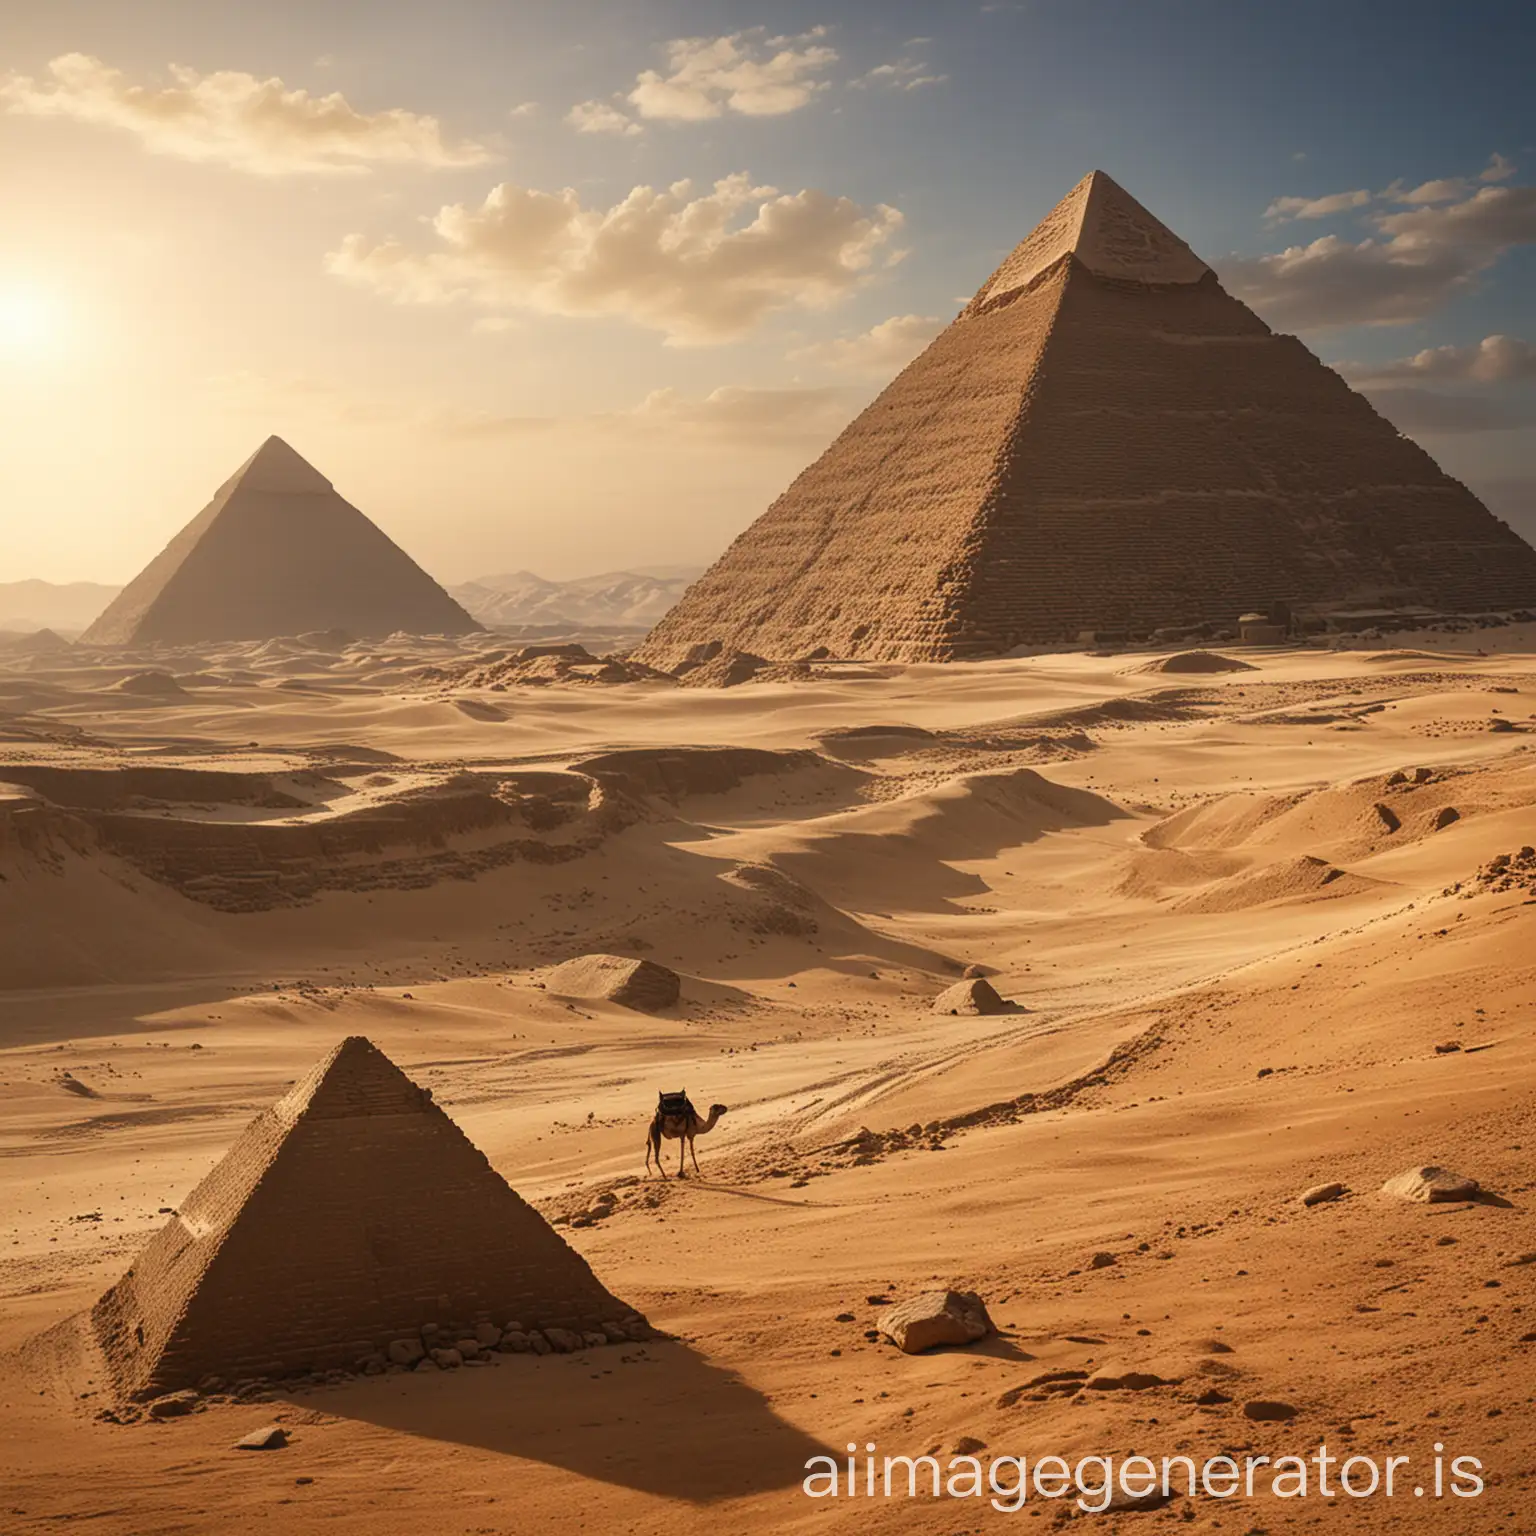 Create a breathtaking image of ancient pyramids set against a desert landscape. The scene should evoke a sense of wonder and historical grandeur. Include the following elements to enhance the composition:nPyramids: The primary focus should be on the iconic pyramids, capturing their imposing size and timeless architectural precision. Include a combination of well-known pyramids, such as the Great Pyramid of Giza, with accurate details.nDesert: Surround the pyramids with a vast, arid desert, characterized by rolling dunes and a golden, sandy expanse. The texture and patterns of the sand should be clearly visible.nSky: Feature a clear, deep blue sky with minimal clouds, or consider a dramatic sunset or sunrise with warm, vibrant hues to add depth and contrast to the scene.nForeground: Incorporate elements such as scattered stones, ancient artifacts, or a lone camel to add context and interest to the foreground.nLighting: Use natural lighting to create strong contrasts and shadows, highlighting the contours and details of the pyramids and the desert landscape.nAtmosphere: Convey a sense of historical significance and mystery. Consider adding subtle elements like distant mirages or a slight haze to enhance the ancient, timeless feel of the scene.nThe final image should evoke a sense of awe and reverence for the ancient world, capturing the majestic and enduring beauty of the pyramids in their natural desert setting.